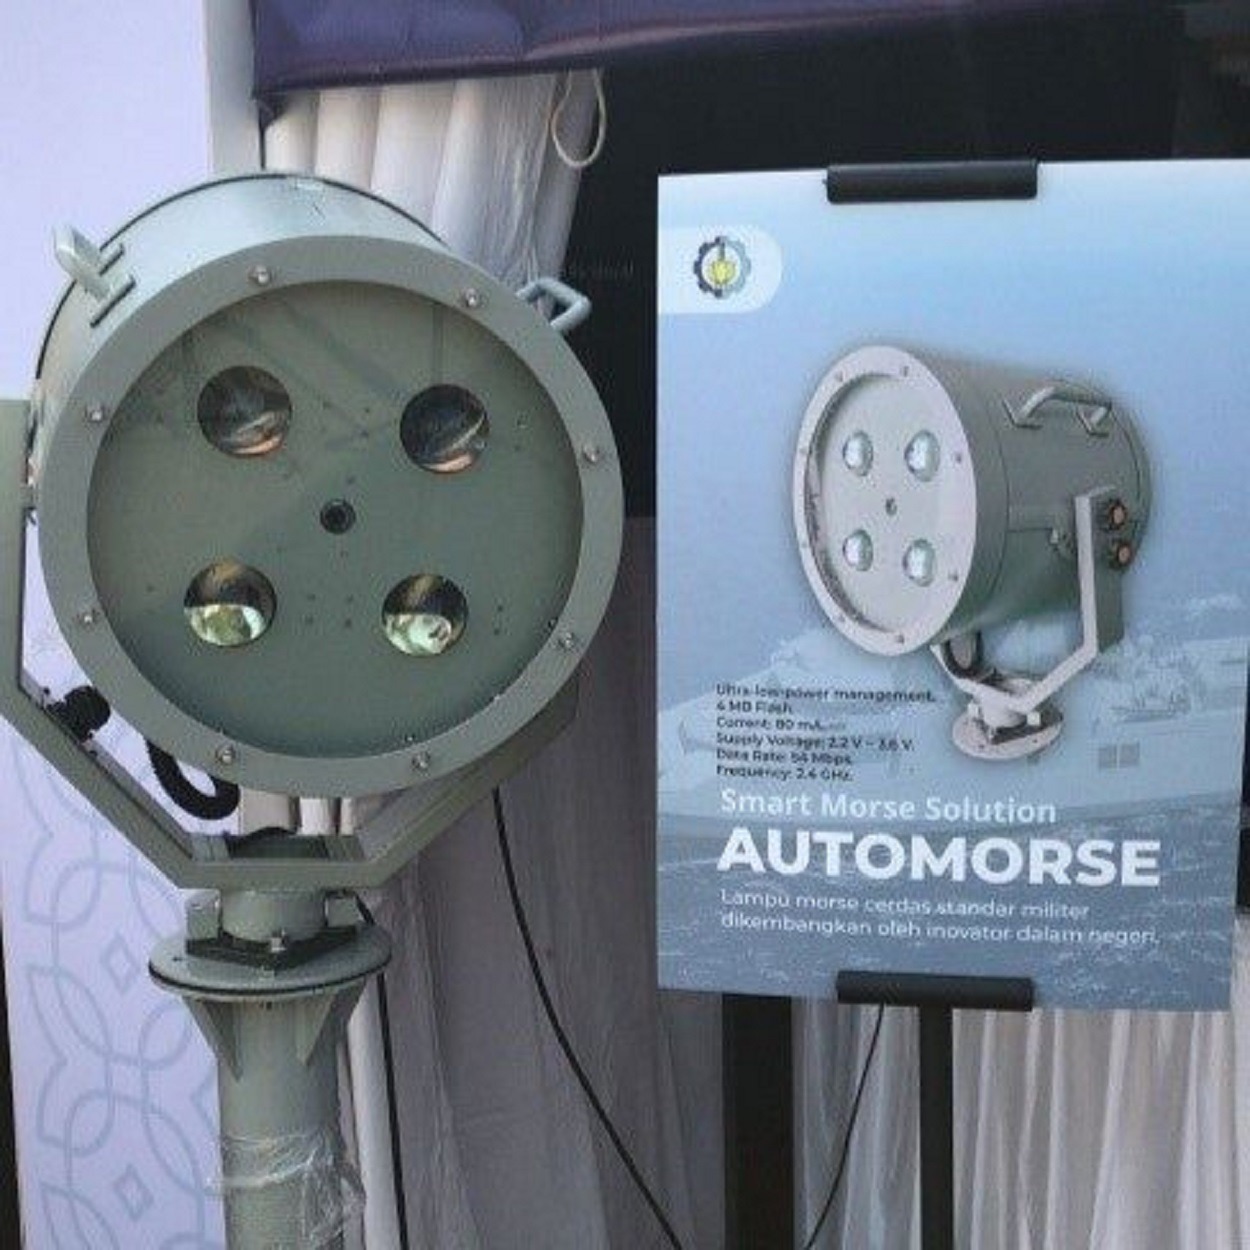 SFPS Automorse by a state innovator from the students of the Sepuluh Nopember Institute of Technology (ITS)